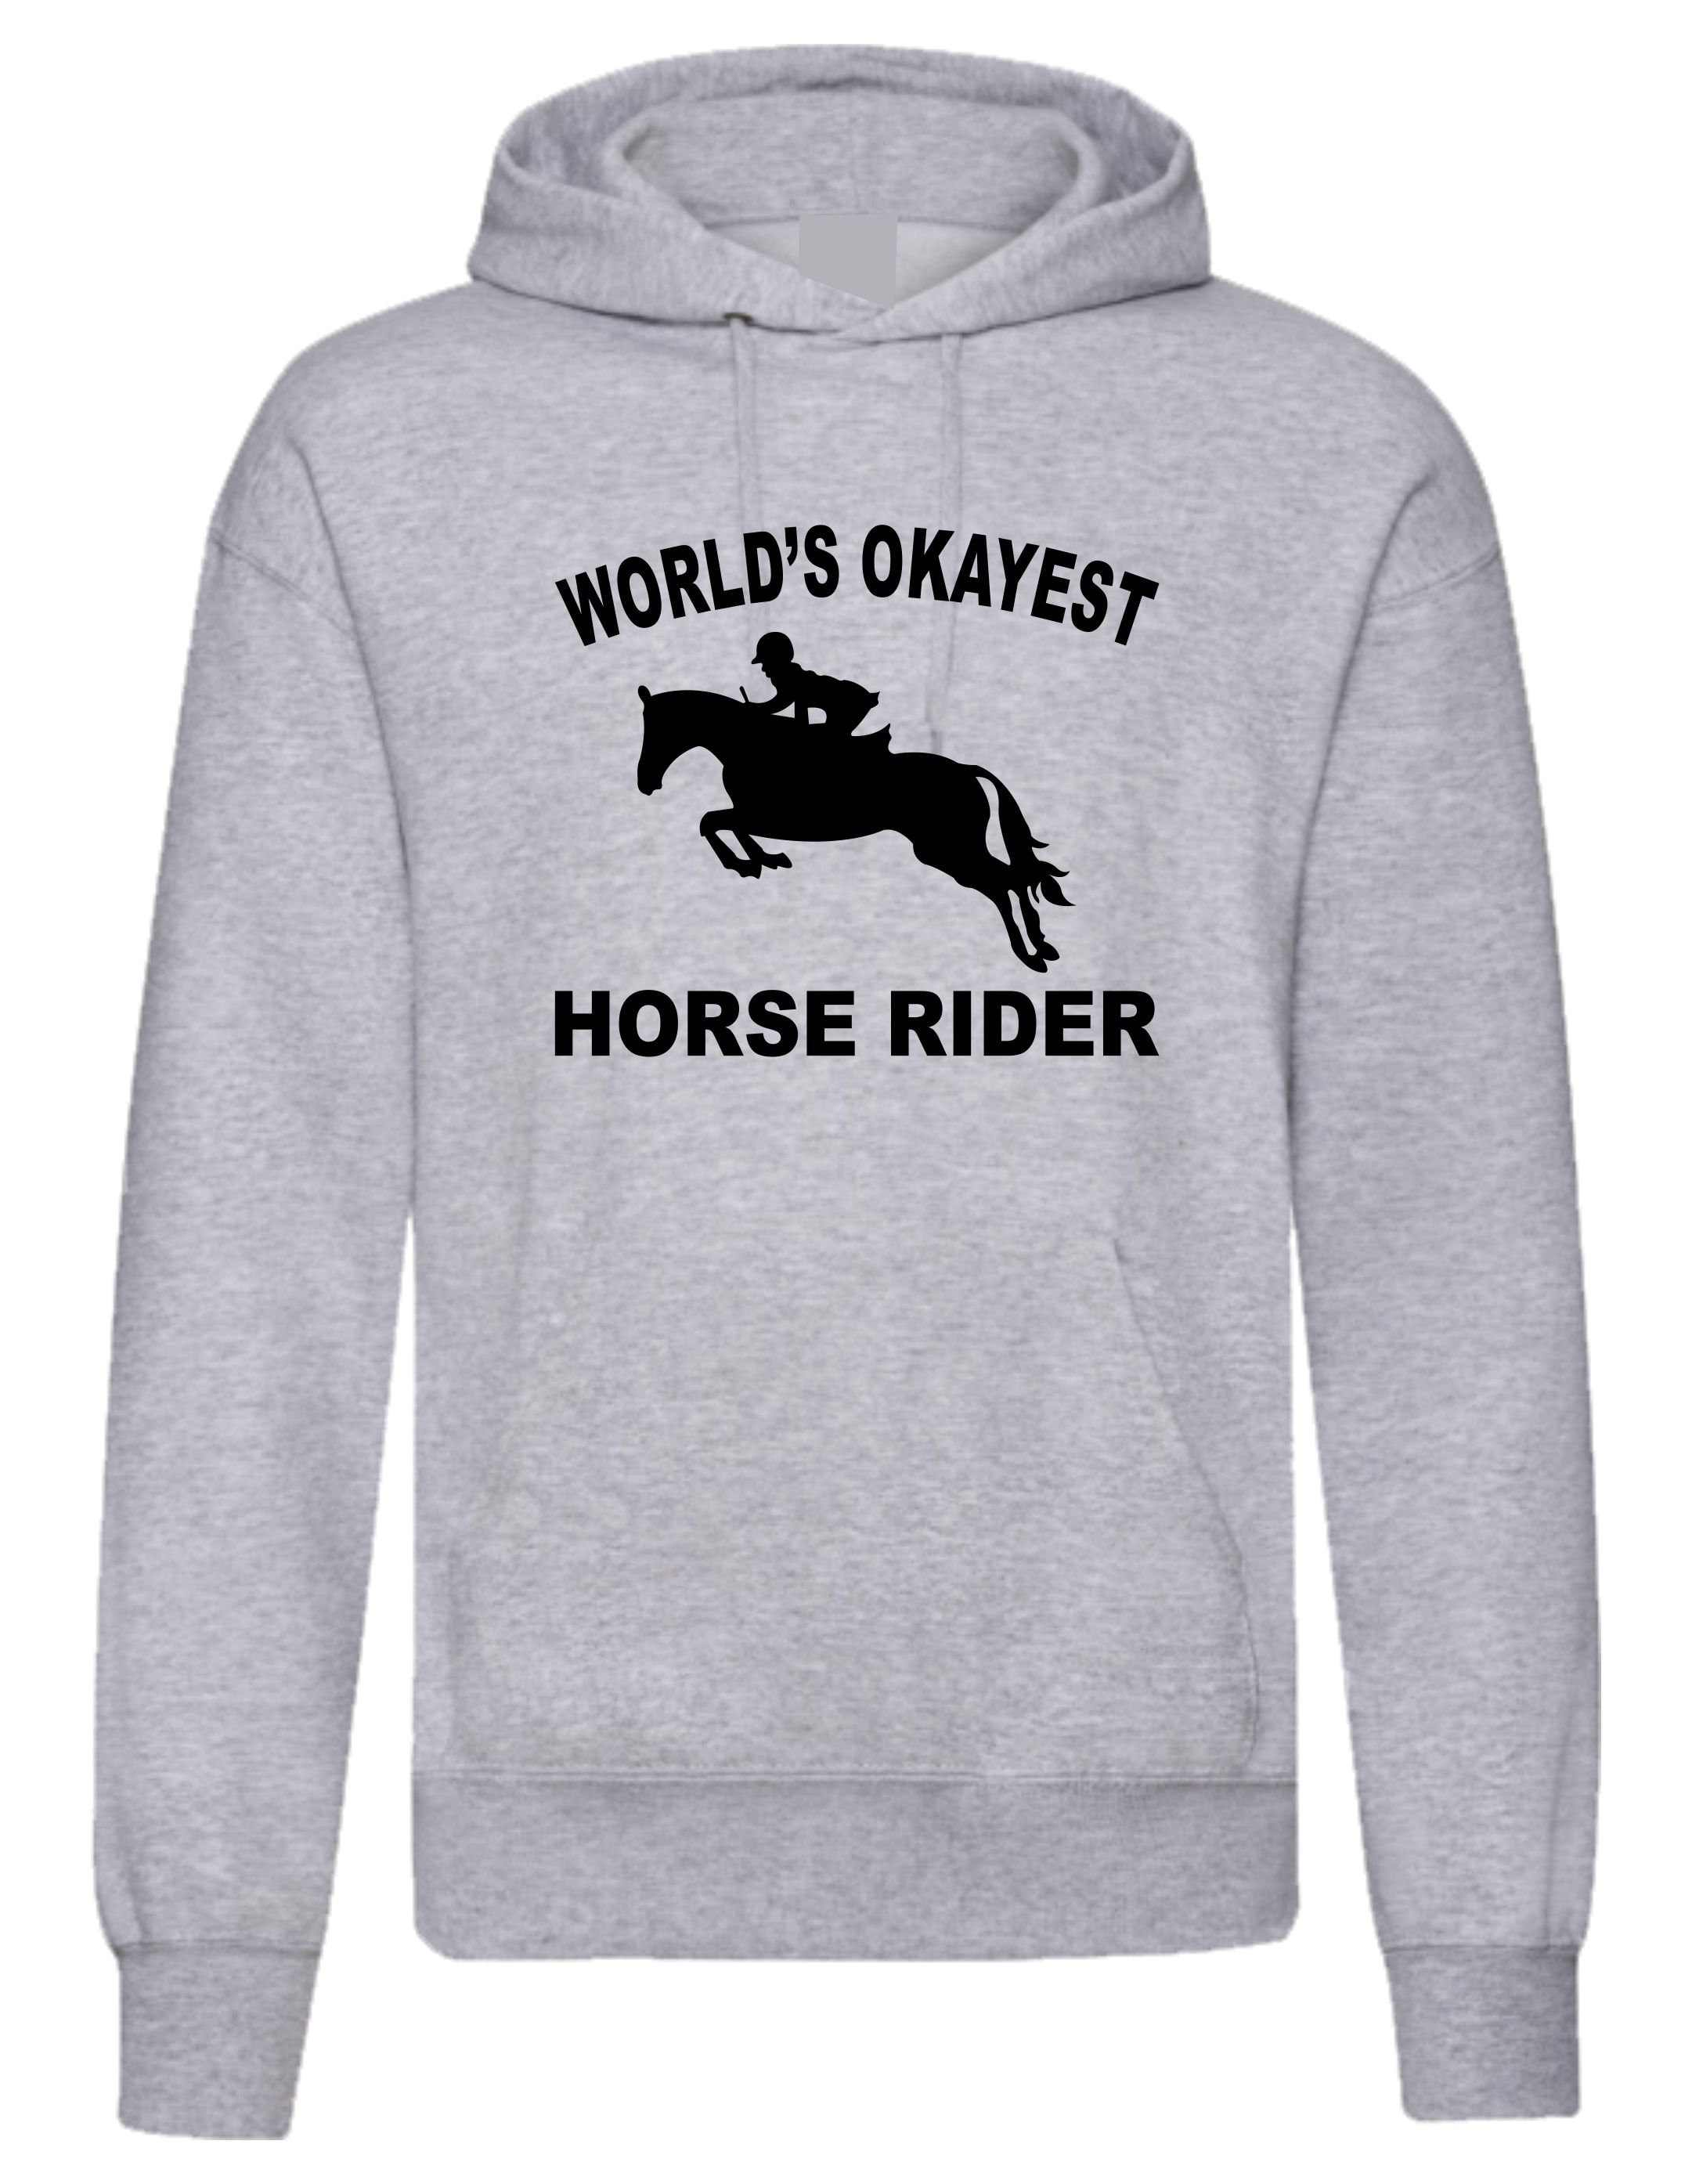 Equestrian Riding Hoody Gift In The UK Gift For Him Gift For Her World's Okayest Horse Rider Unisex Hoodie Horse Lovers Gifts